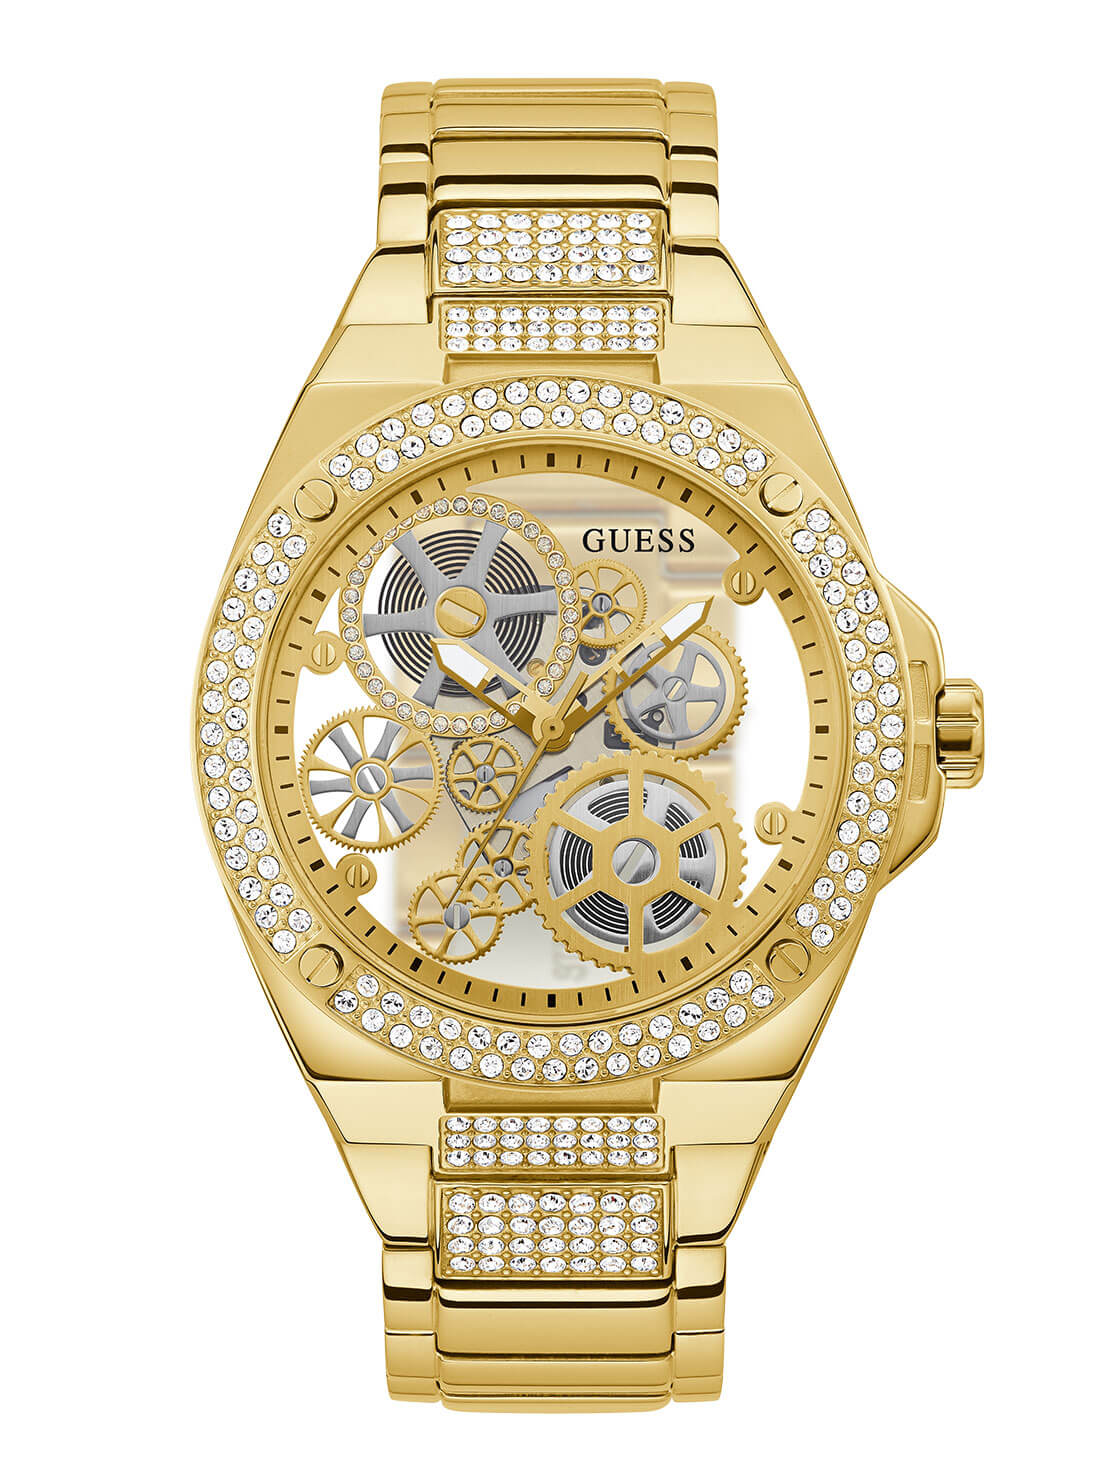 GUESS Mens Gold Big Reveal Watch GW0323G2 Front View